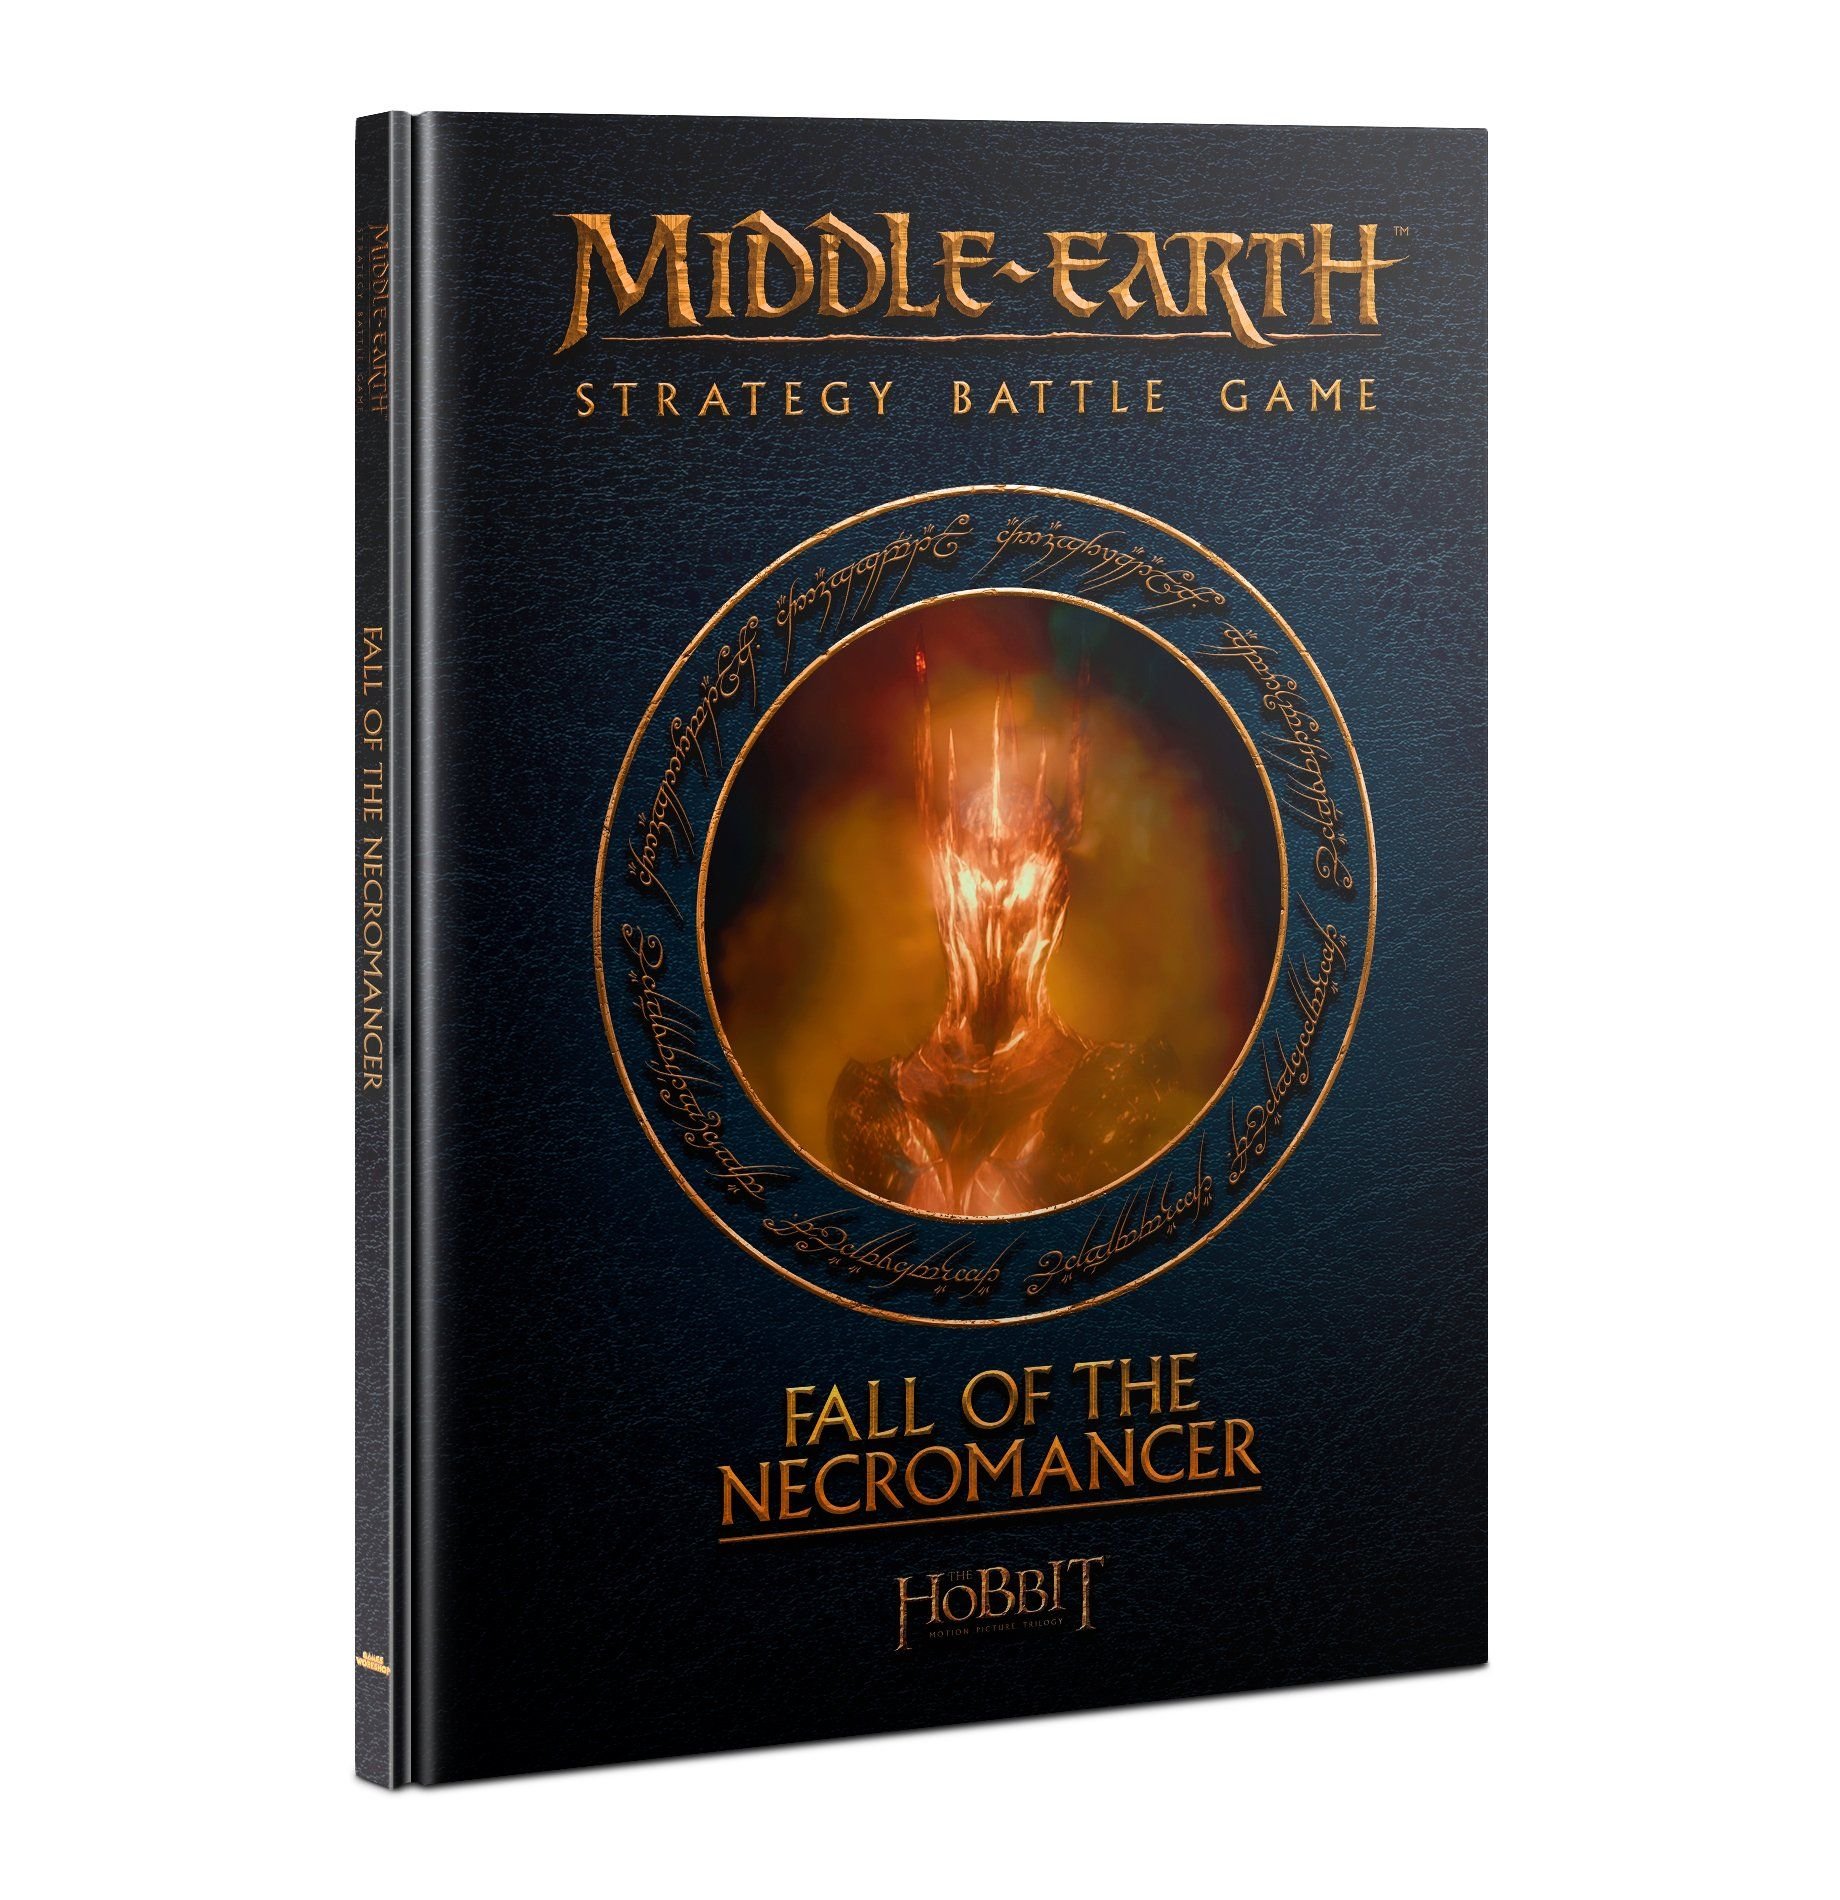 Middle-earth Strategy Battle Game: Fall of the Necromancer Hardback - English